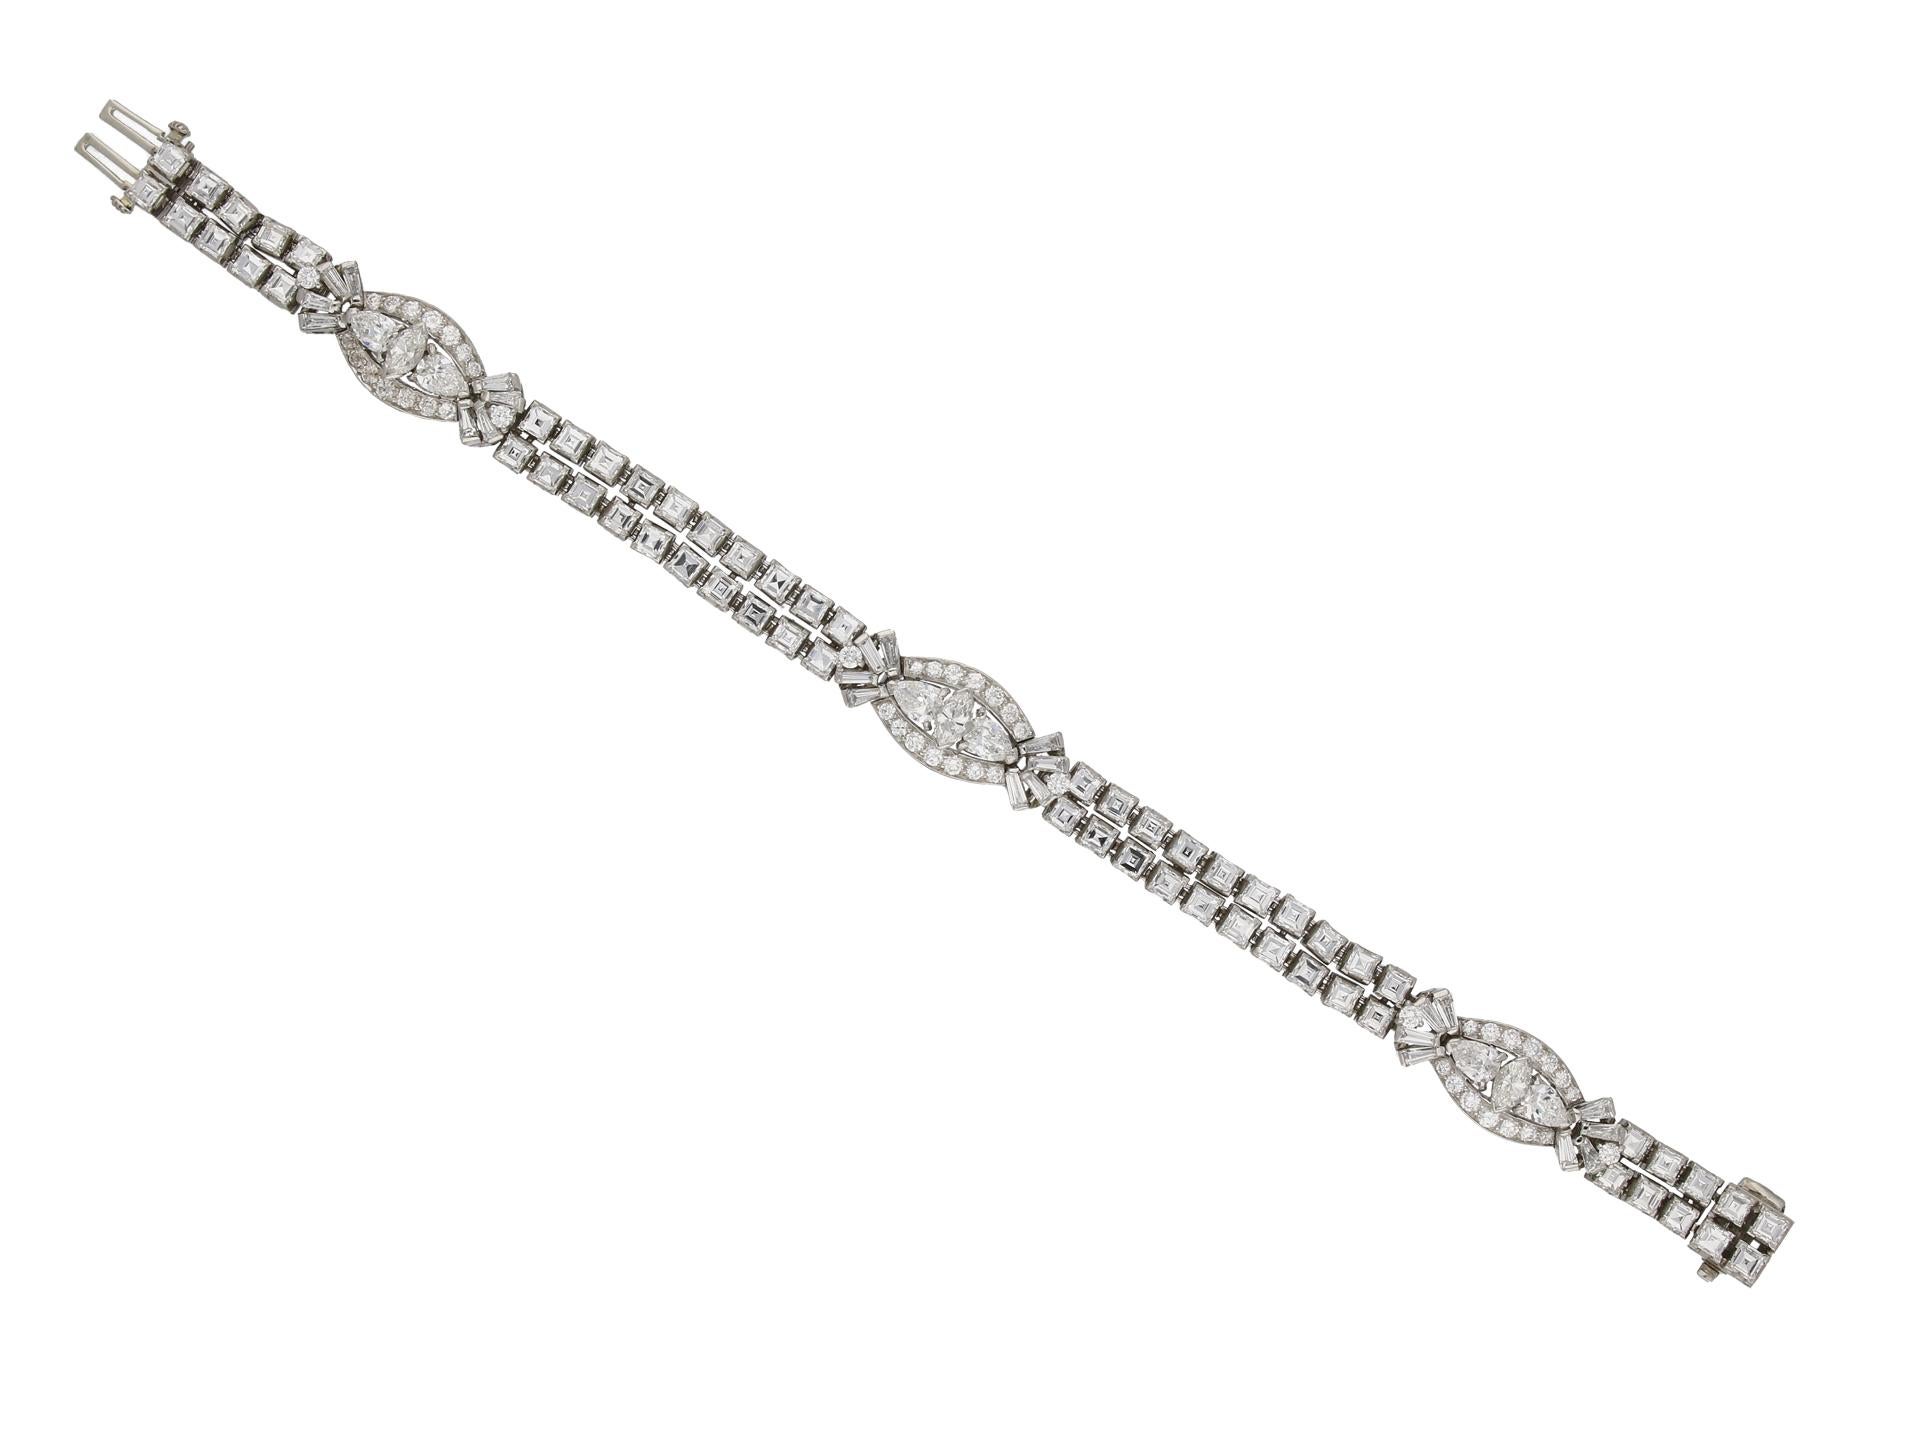 Diamond bracelet by Oscar Heyman Brothers. An articulated two row bracelet set with three motifs of a vertically set marquise shape brilliant cut diamond in an open back claw setting, all three with a combined weight of 0.75 carats, flanked by two